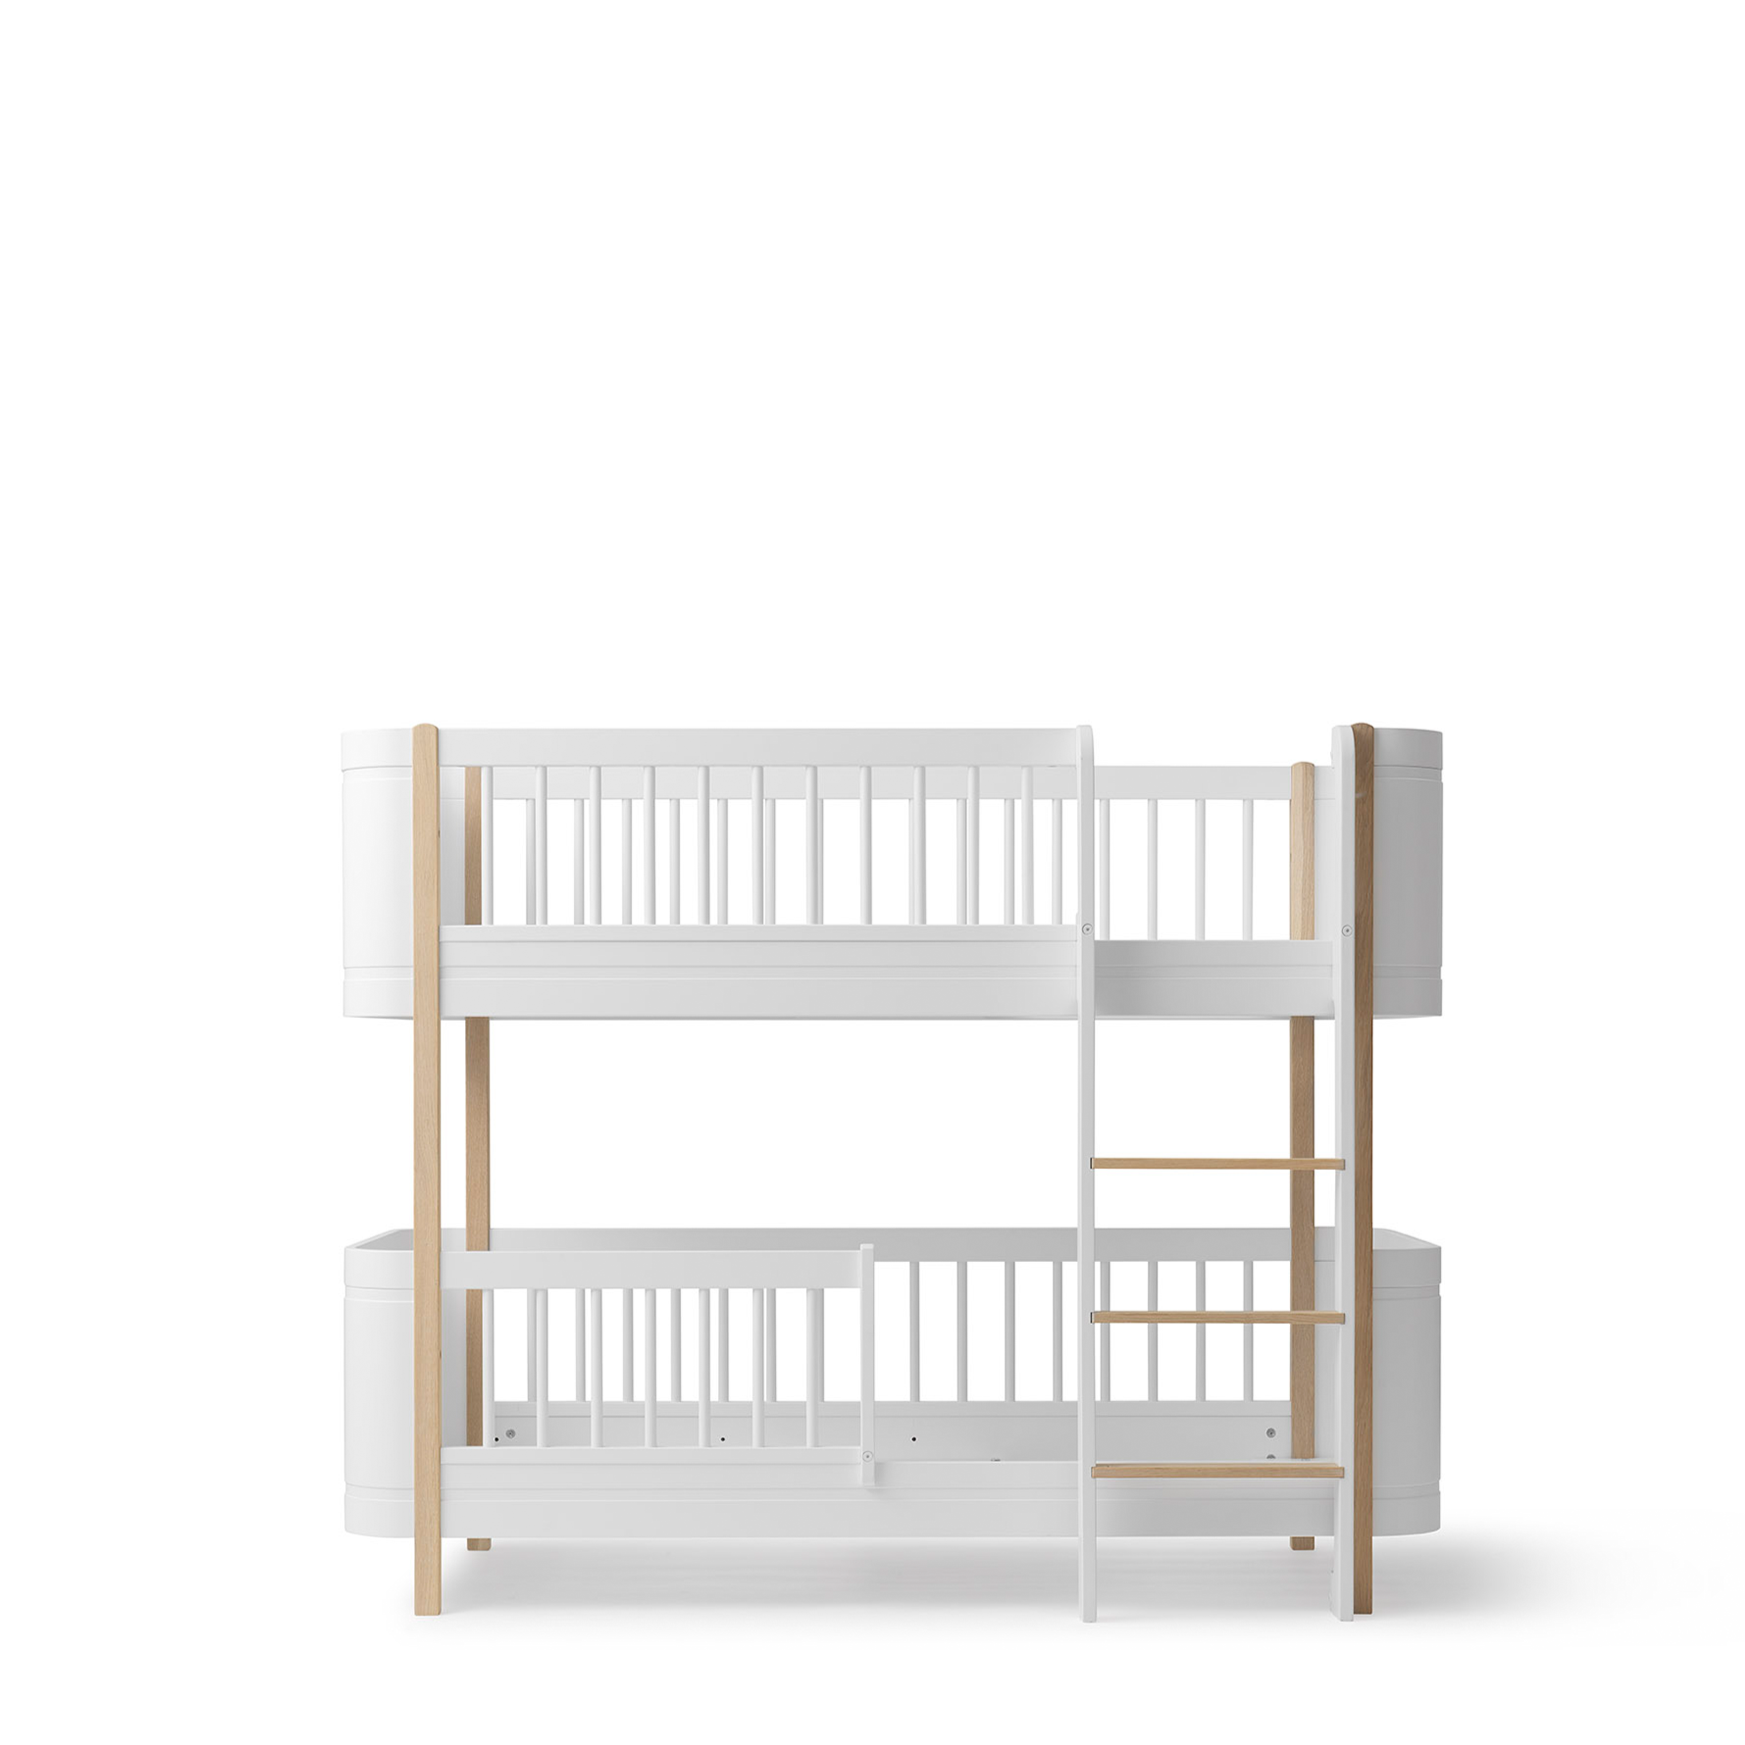 Mini+ Bunk Bed Conversion Kit for 2 Junior Beds